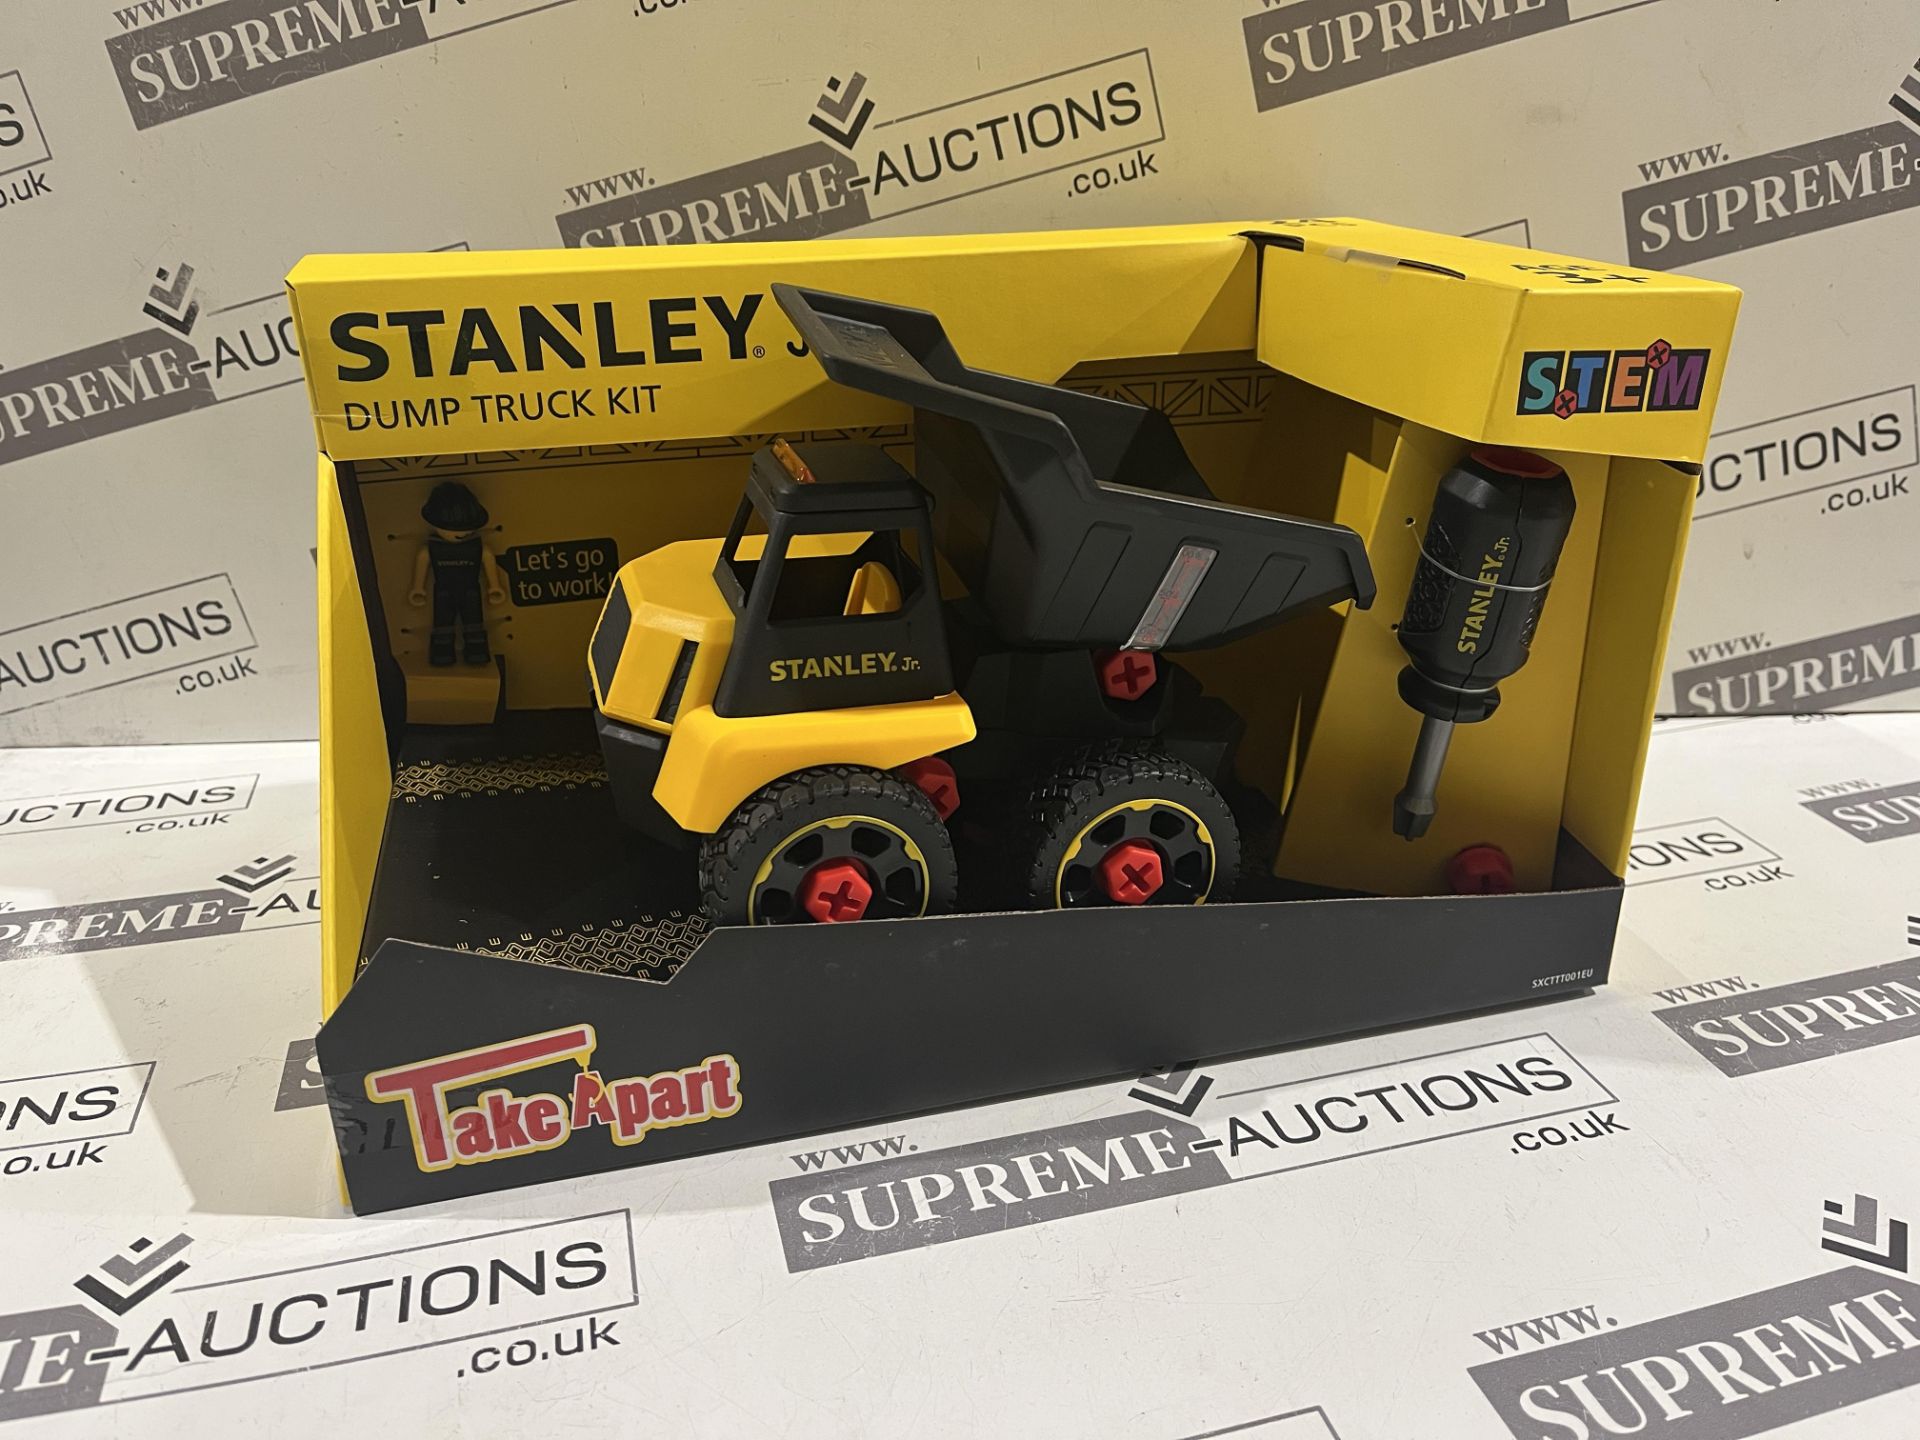 5 X Brand New Stanley Jr. Take A Part Dump Trunk 22 Pieces, - Image 8 of 8